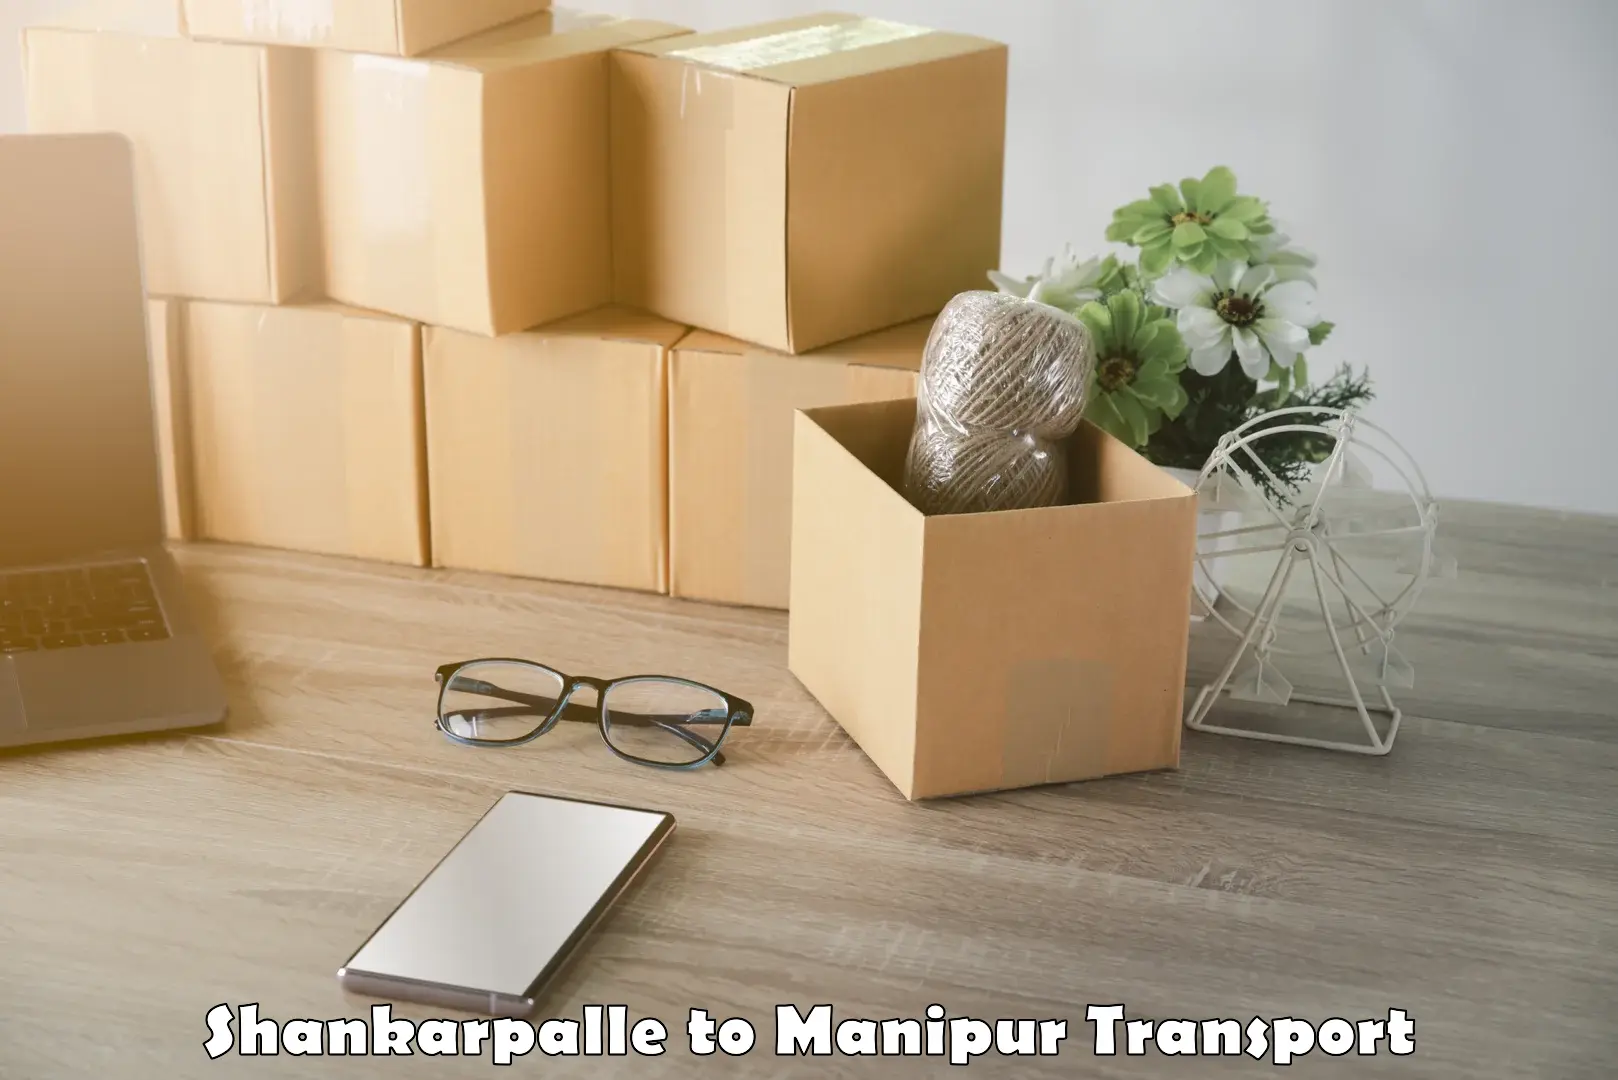 Lorry transport service Shankarpalle to Manipur